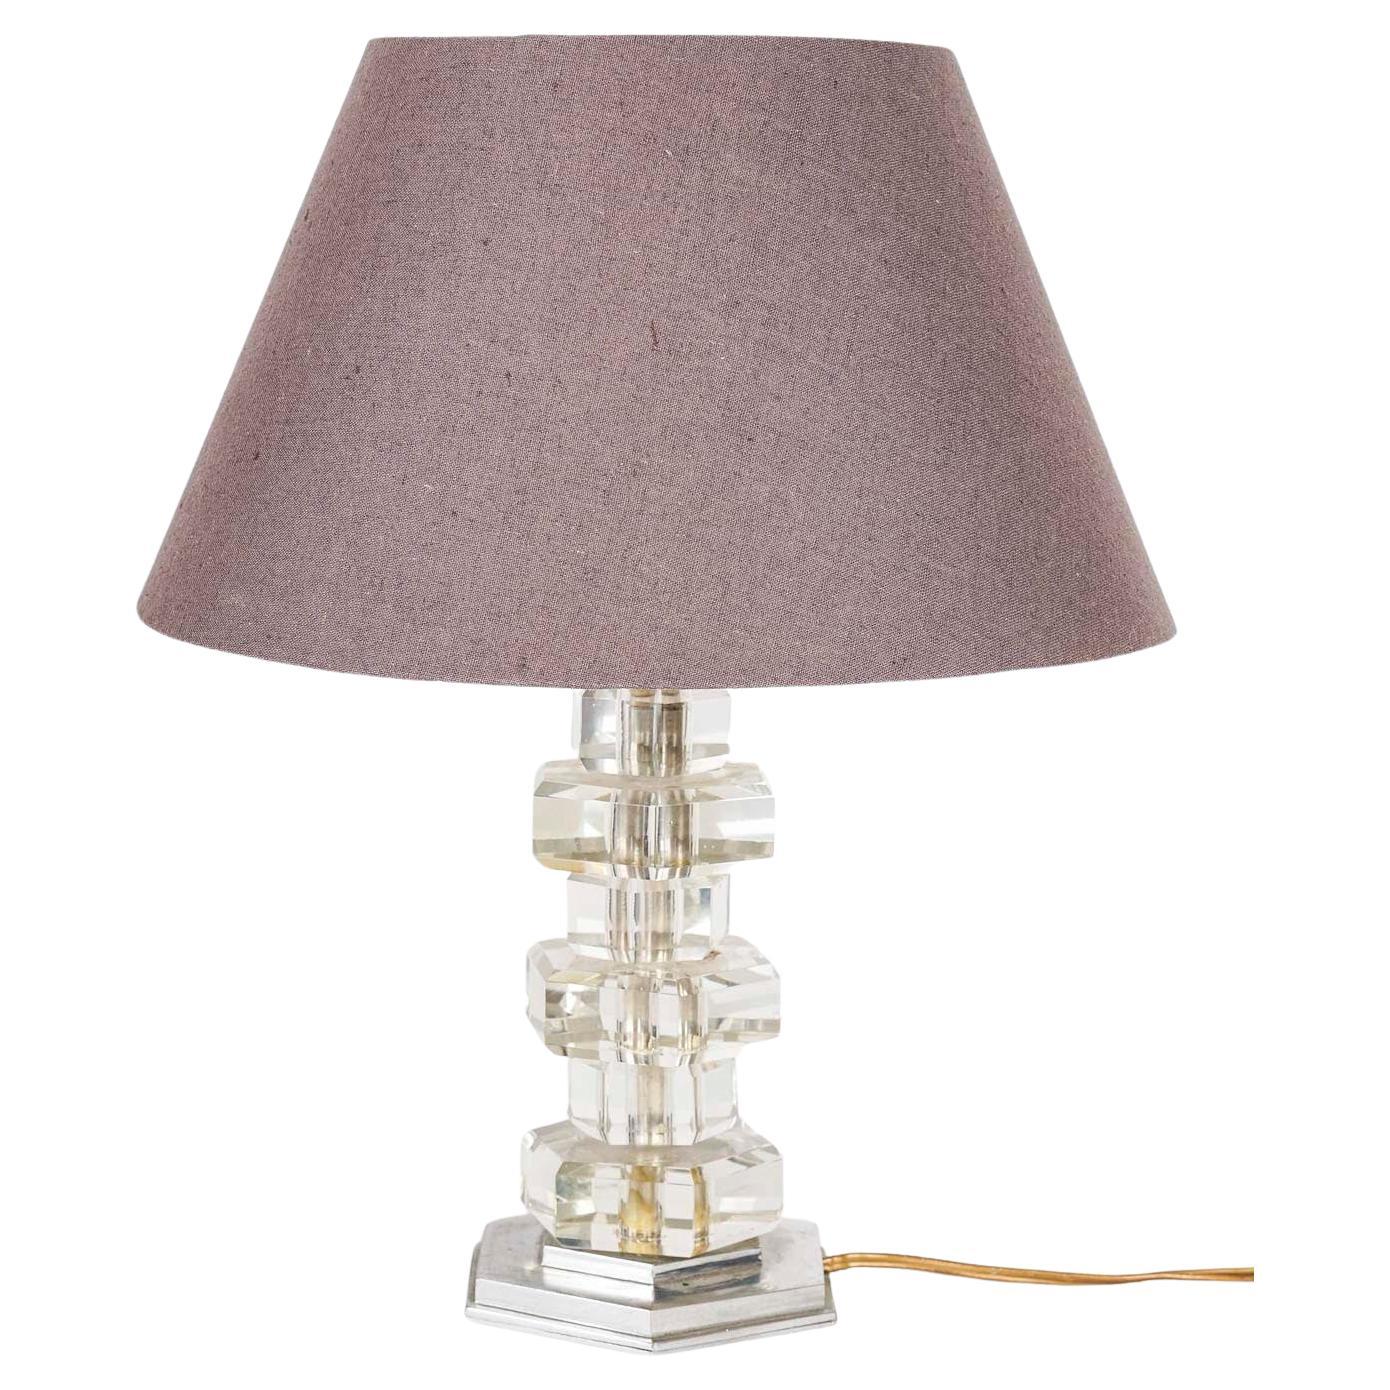 Table Lamp by the Artist Henri Morand, 1940, Modernist Style. For Sale